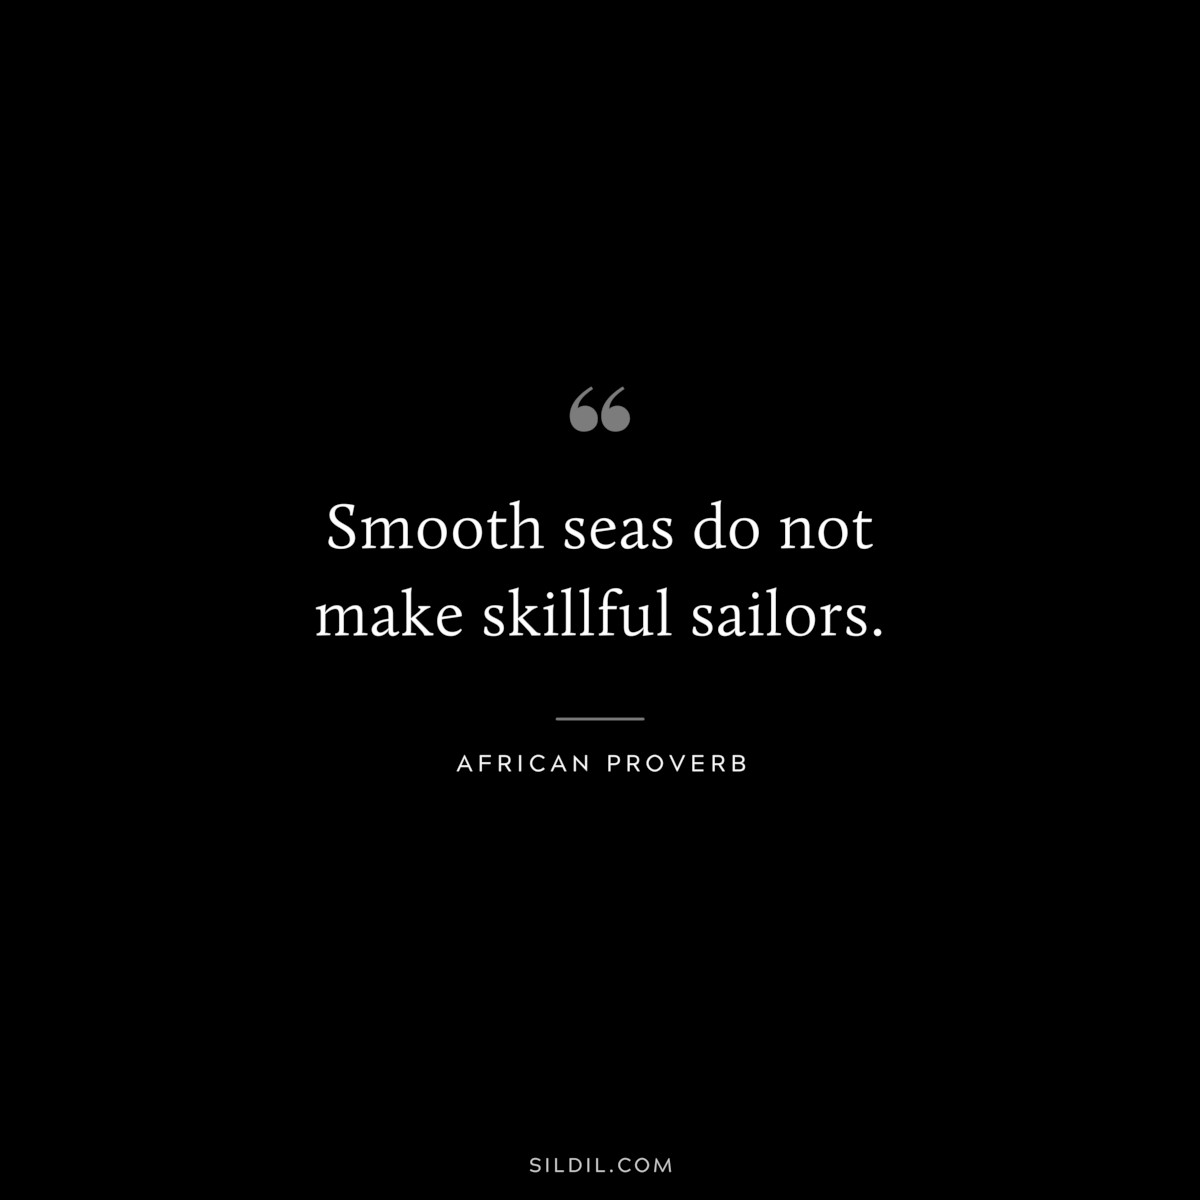 Smooth seas do not make skillful sailors. ― African Proverb